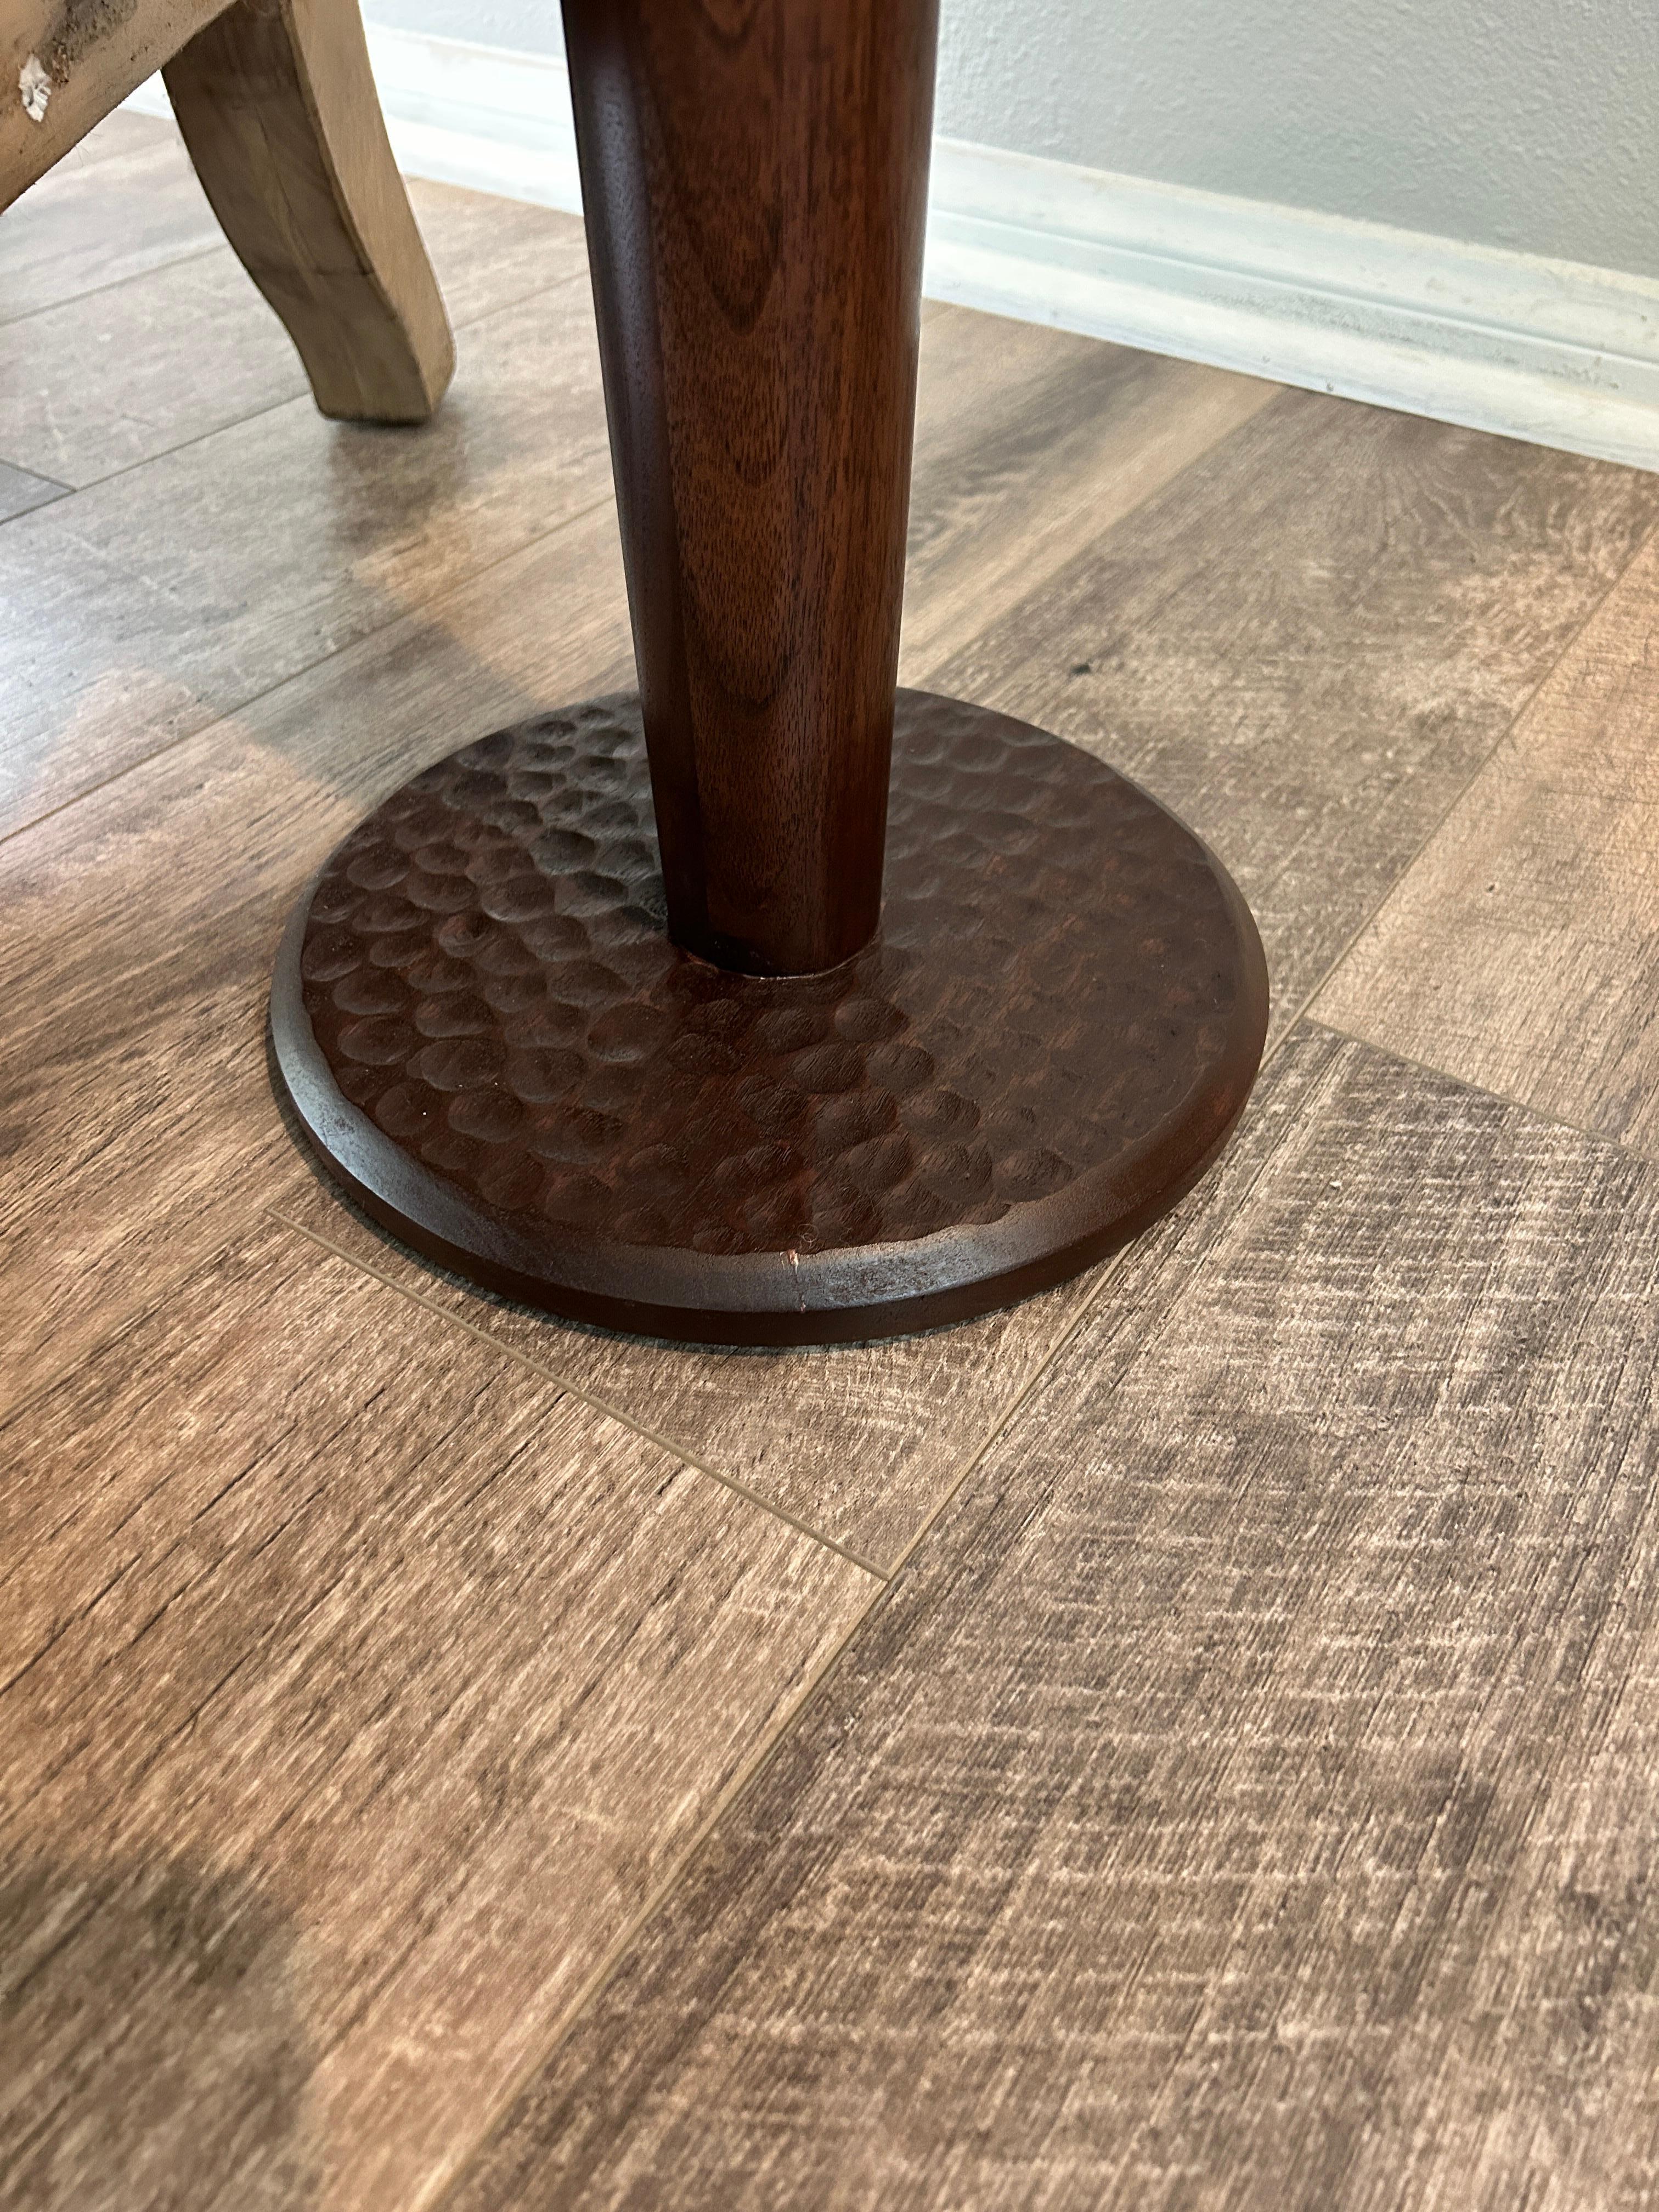 21st Century Mid-Century Modern Inspired Walnut Cocktail Table In New Condition For Sale In Oakhurst, NJ